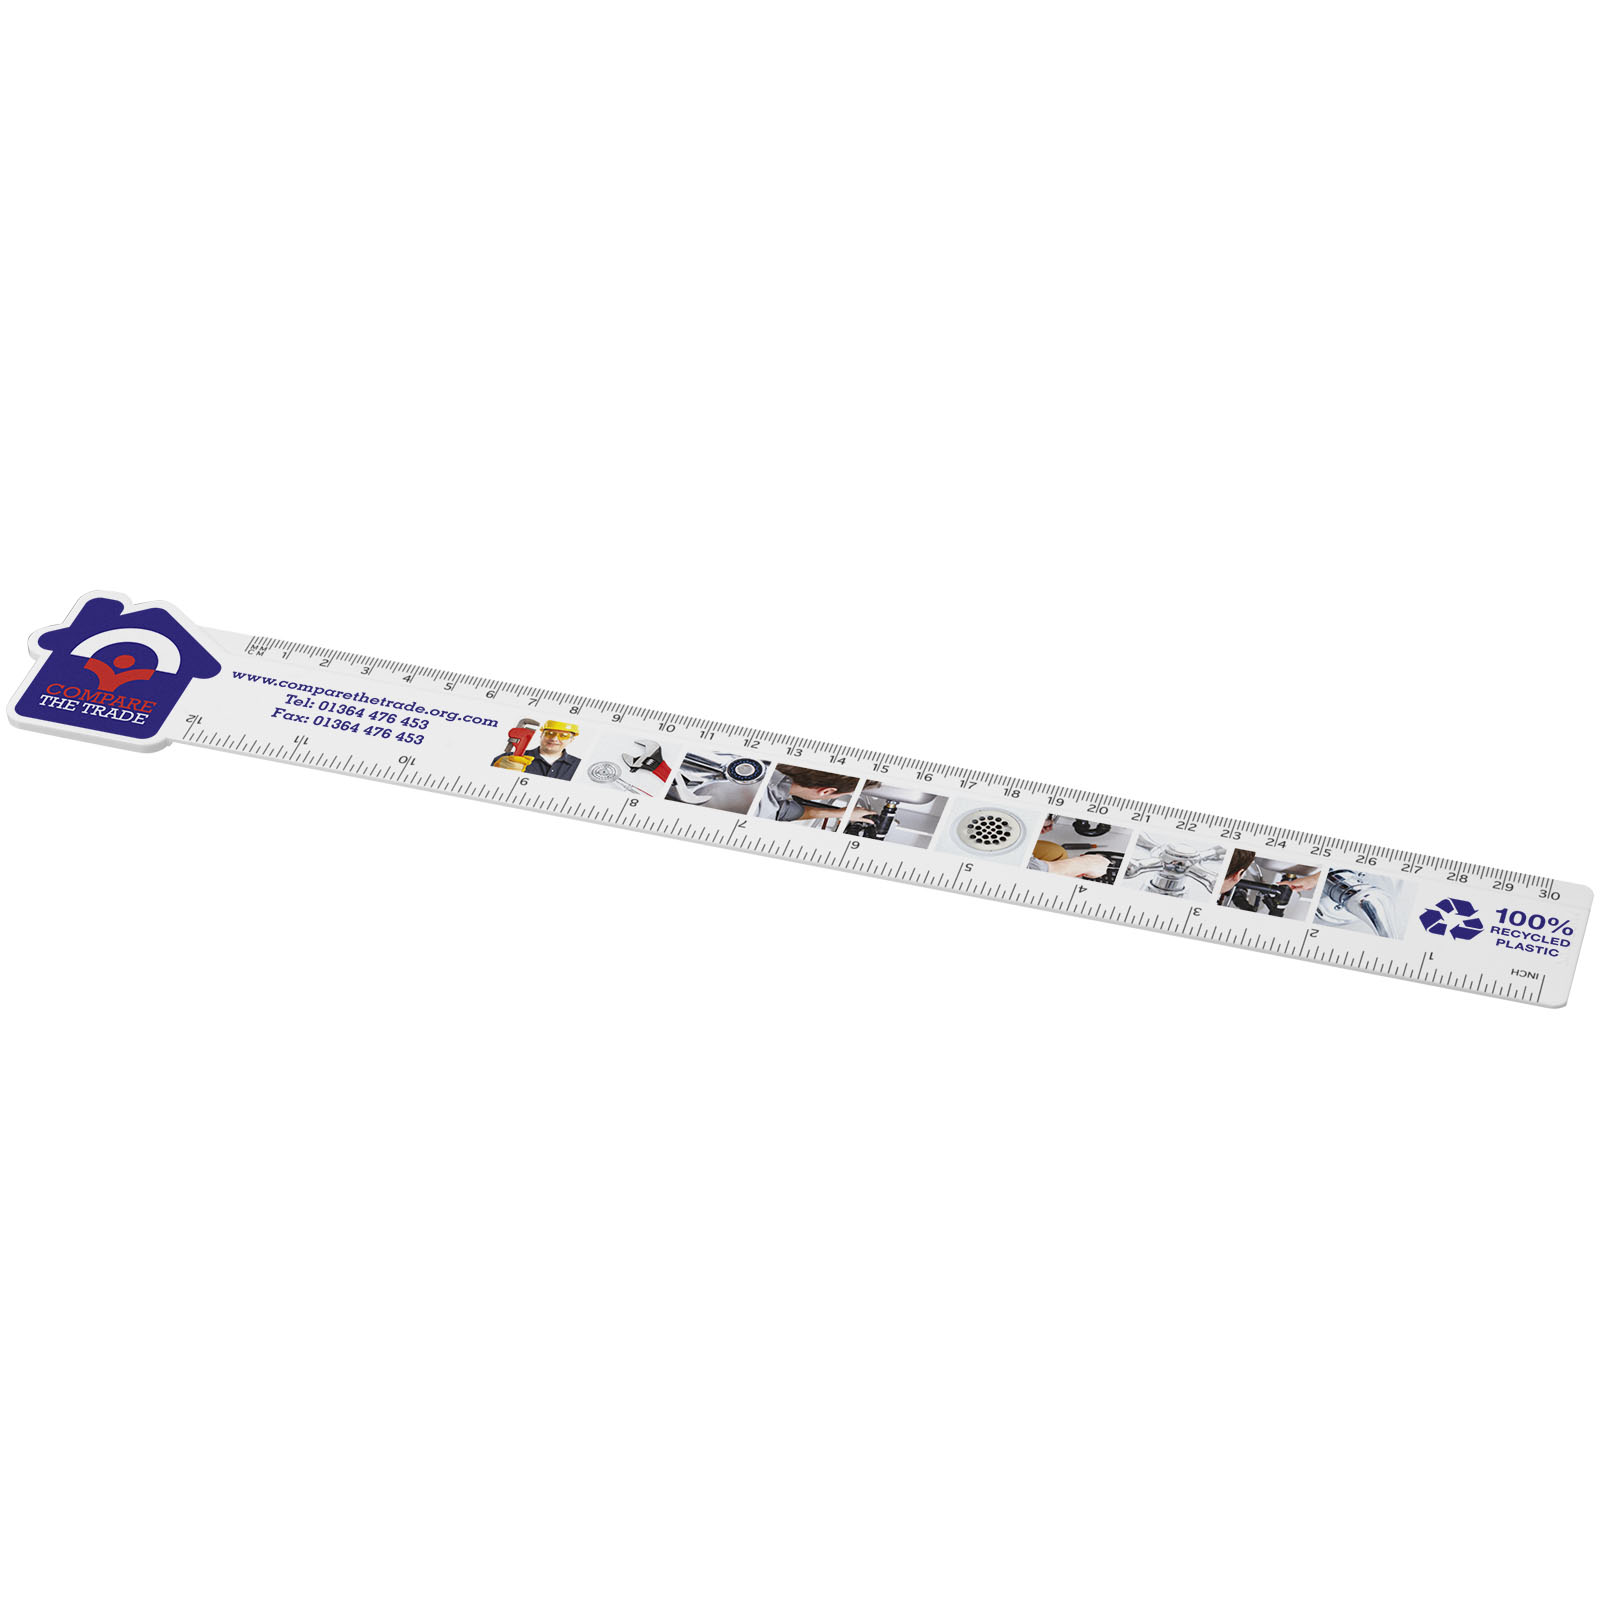 Advertising Desk Accessories - Tait 30cm house-shaped recycled plastic ruler - 0